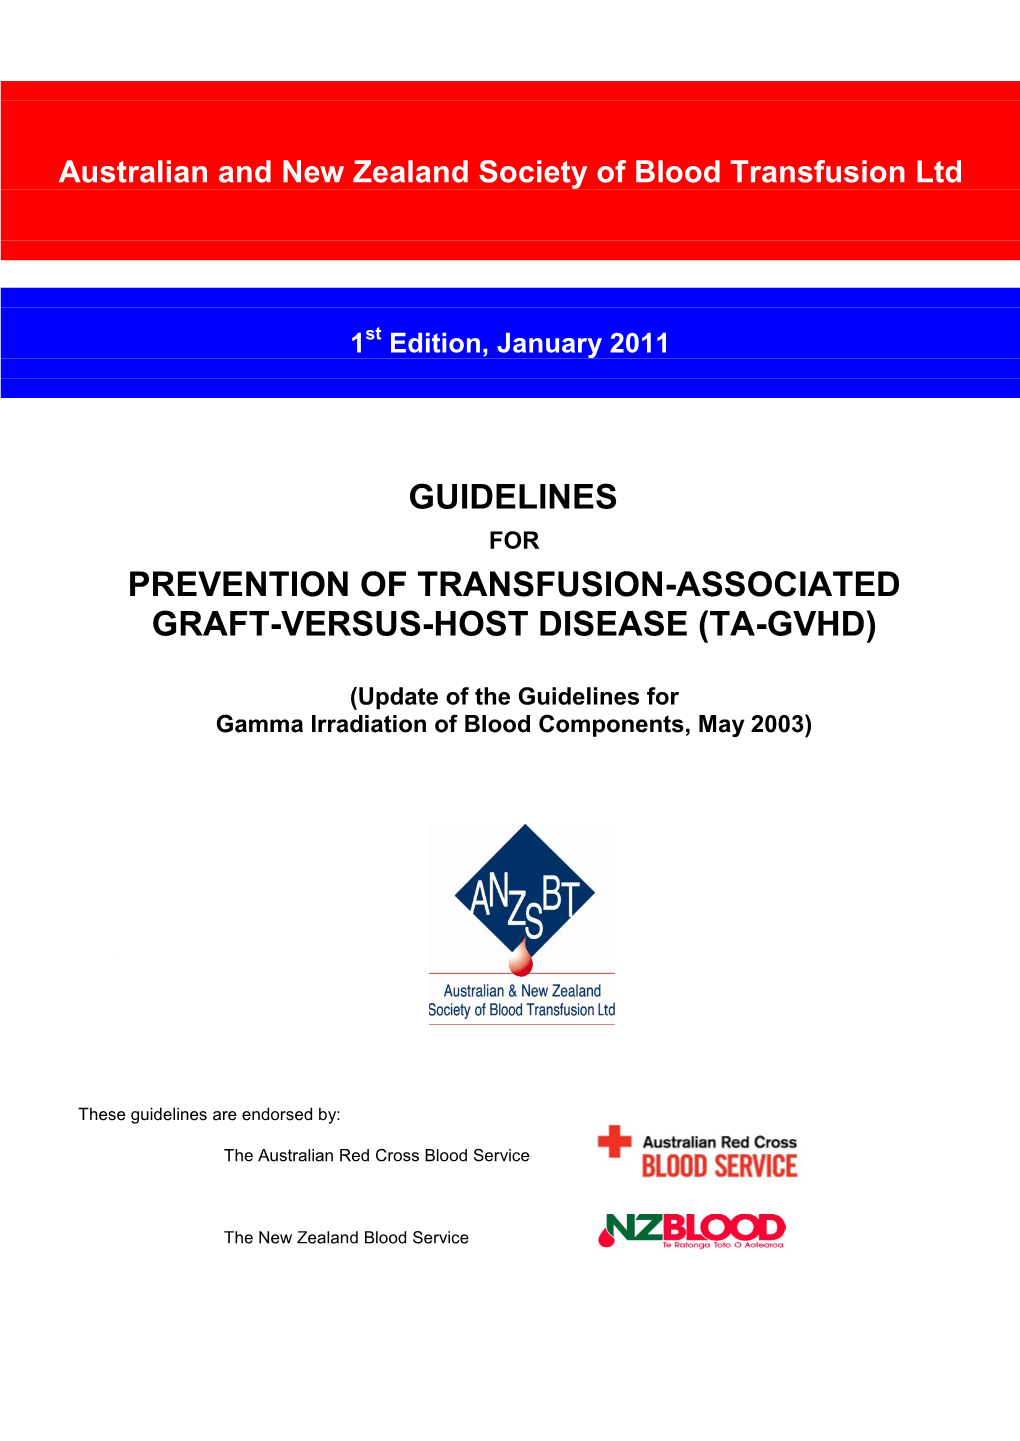 Guidelines for Prevention of Transfusion-Associated Graft-Versus-Host Disease (Ta-Gvhd)